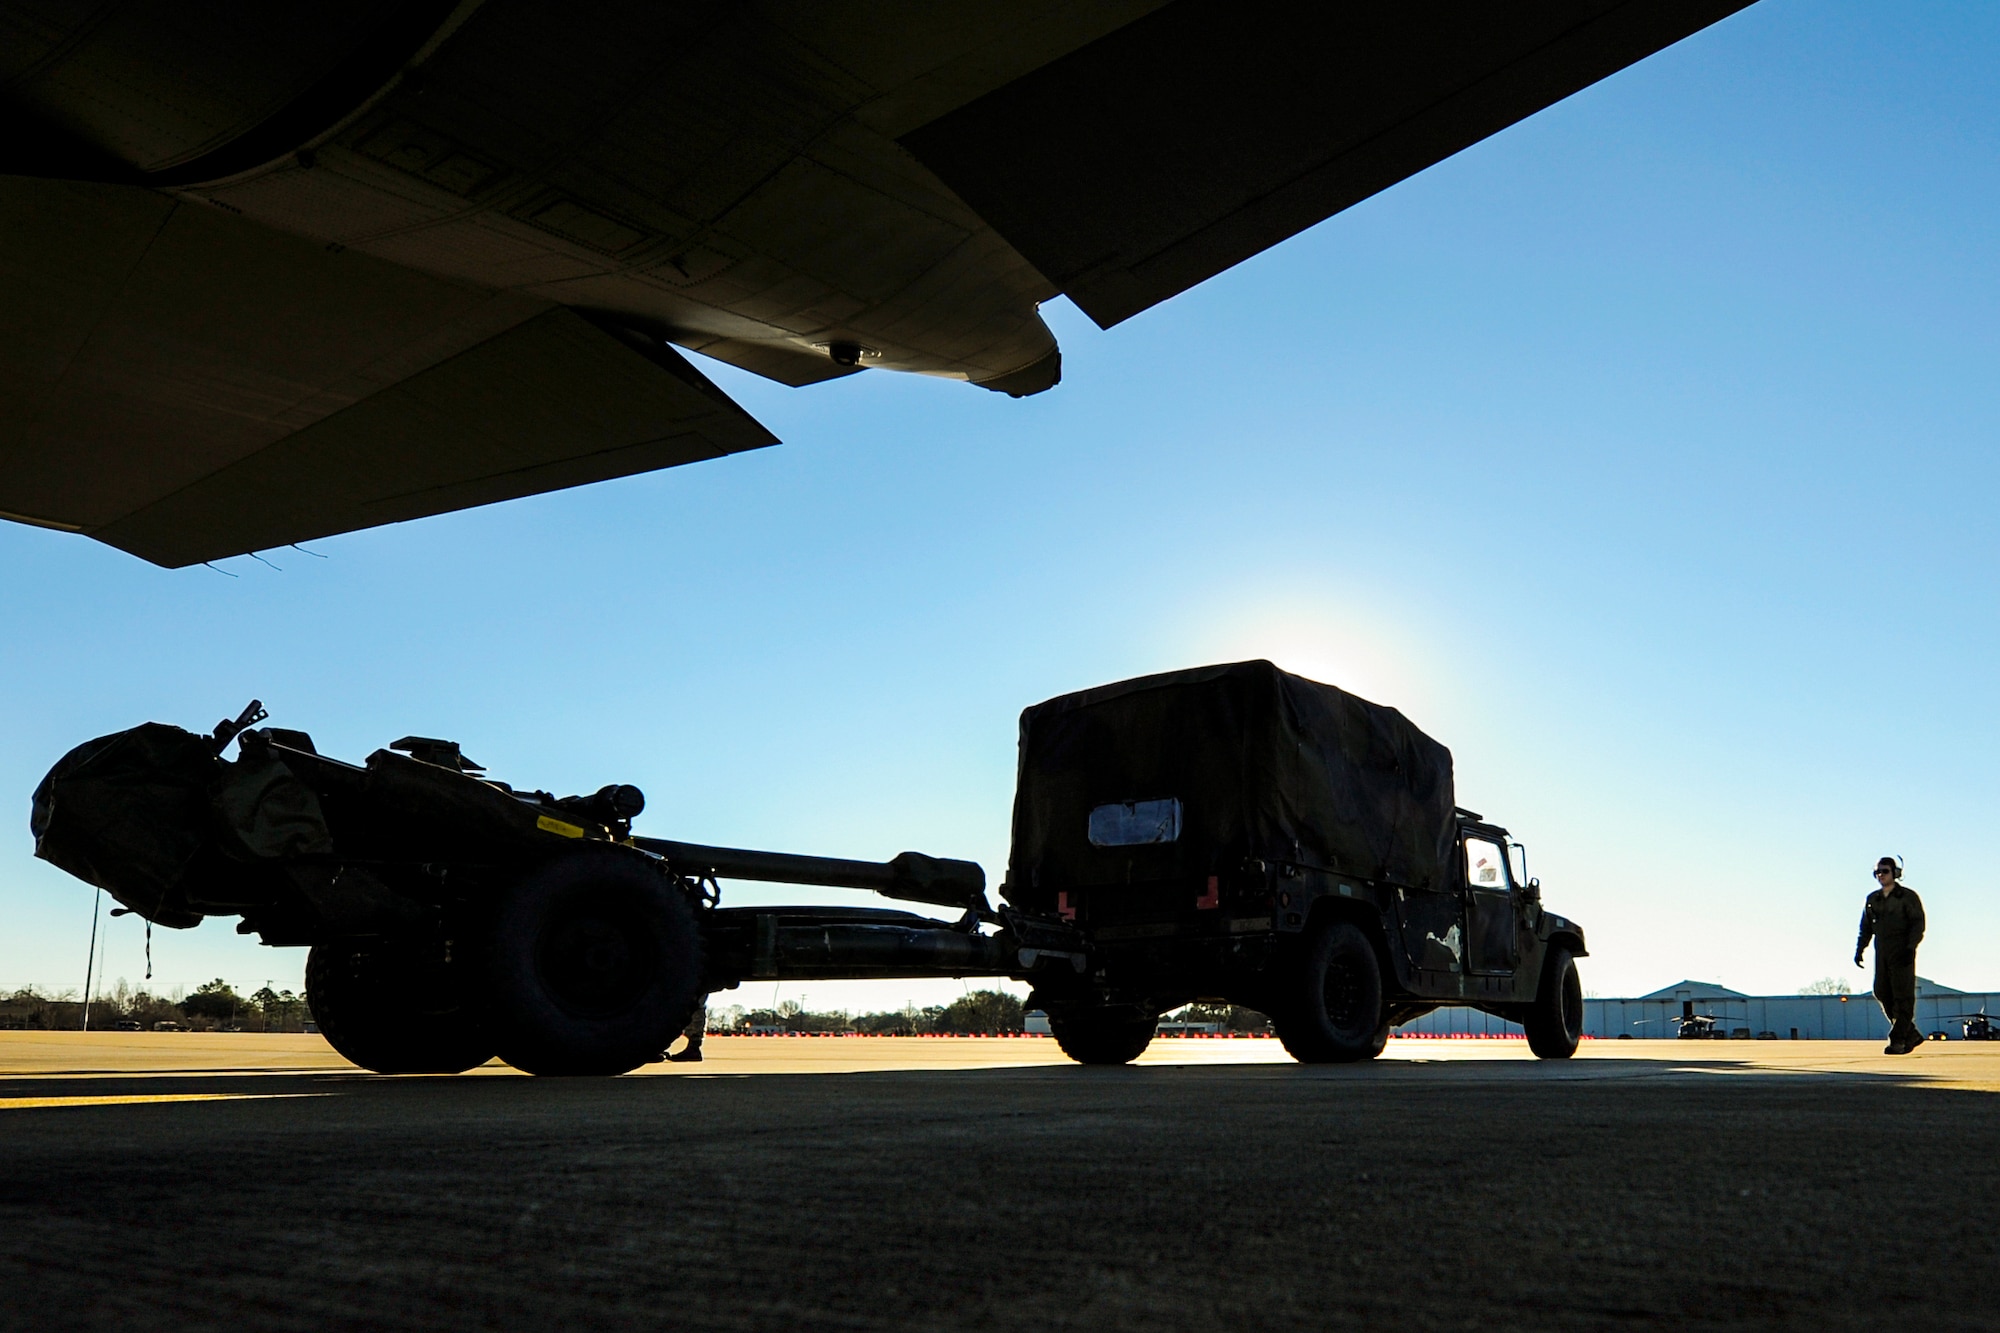 A U.S. Air Force C-130J loadmaster prepares to upload a Humvee and Howitzer Cannon onto a C-130J during GREEN FLAG 16-04 Feb. 17, 2016, at Alexandria International Airport, La. The C-130 can accommodate a wide variety of oversized cargo, including utility helicopters, six-wheeled armored vehicles, standard palletized cargo and military personnel (U.S. Air Force photo/Senior Airman Harry Brexel)